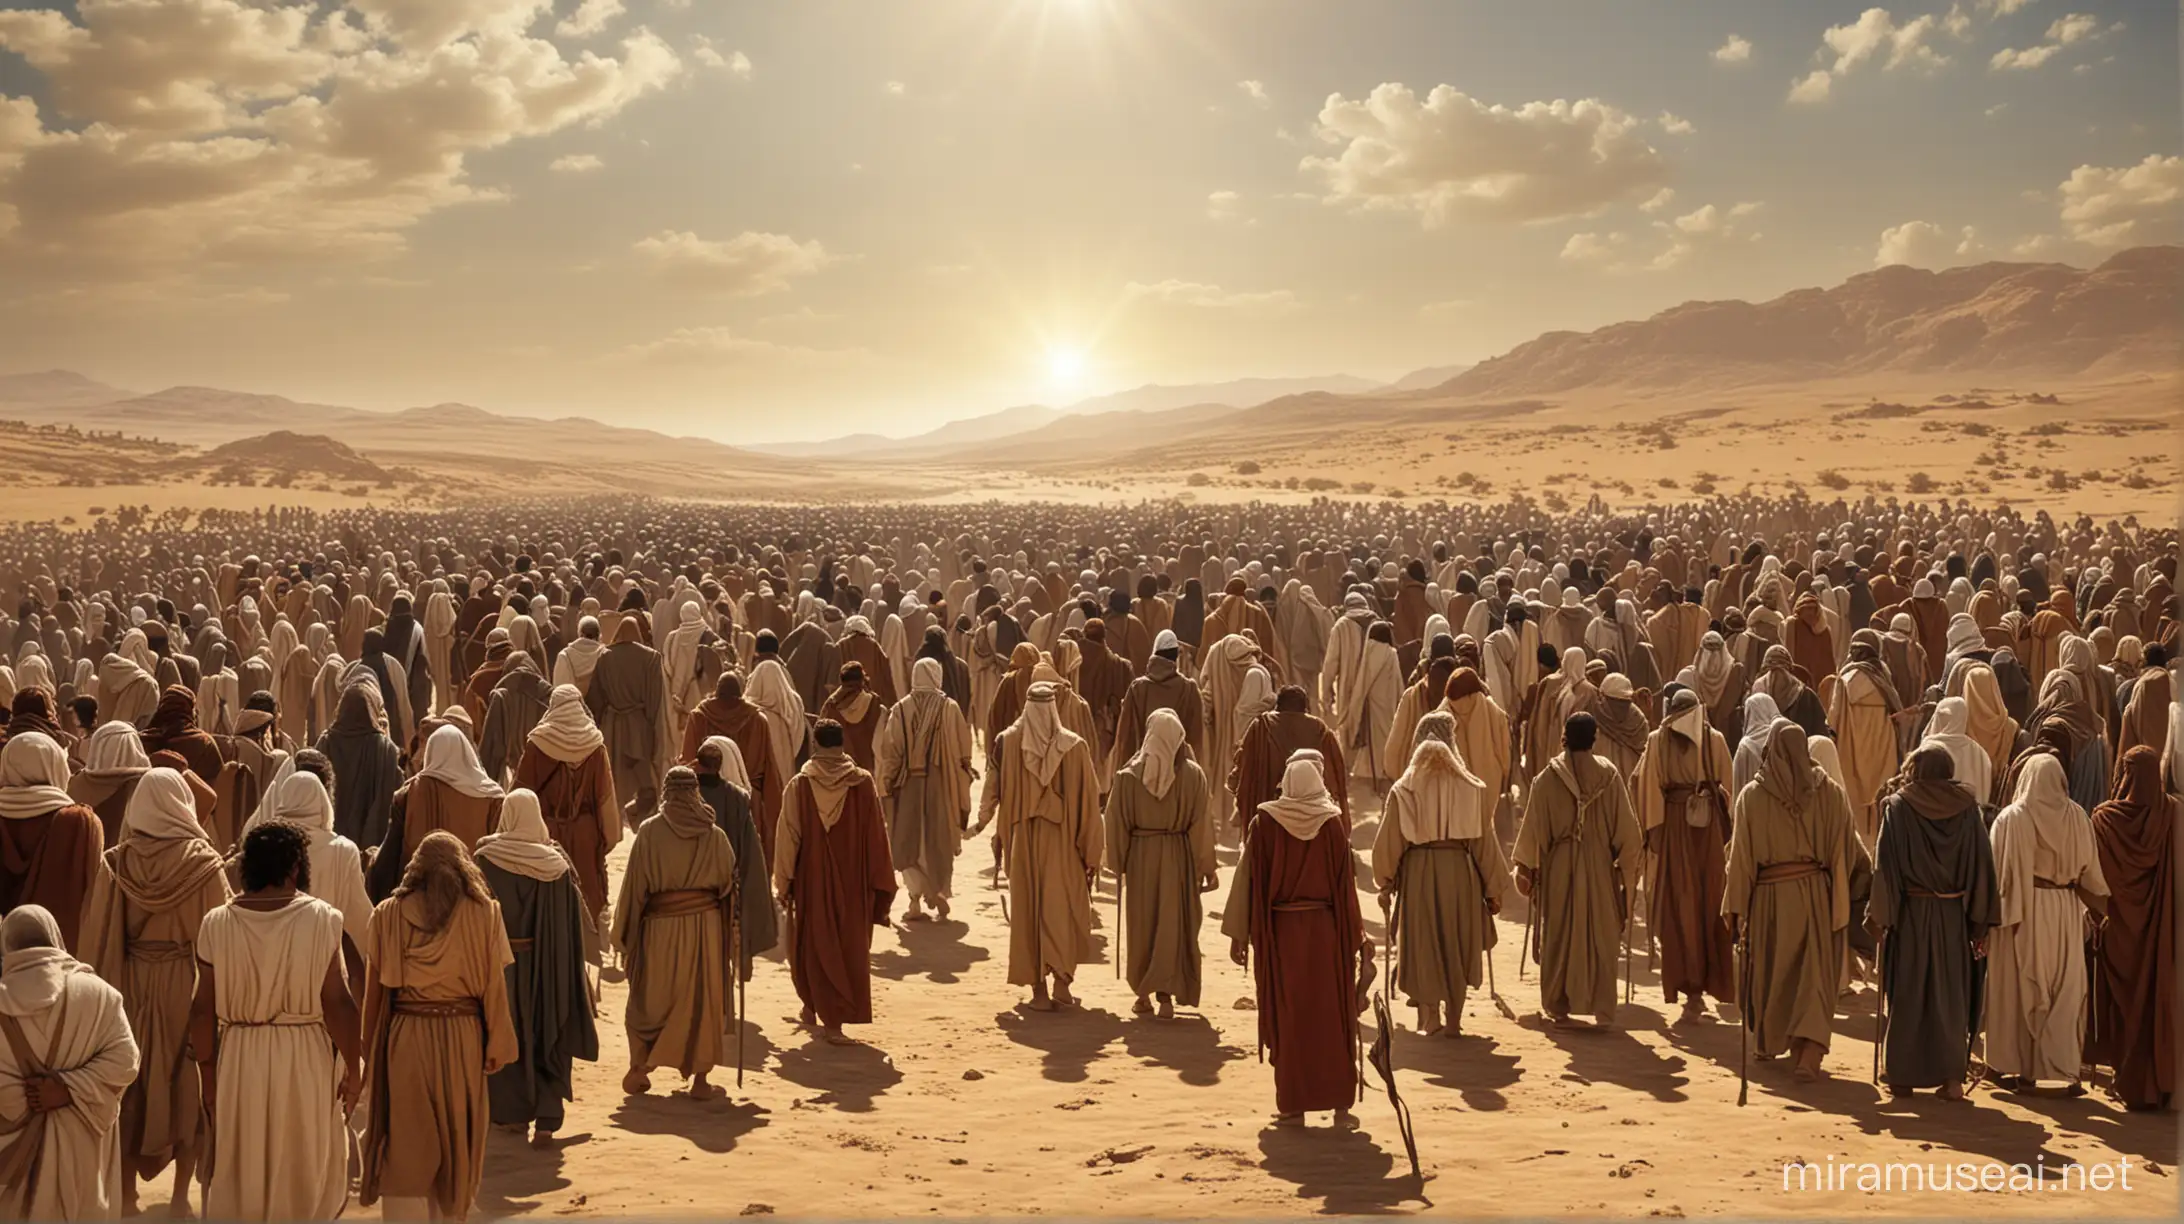 Old Moses Leading Multitude of Israelites to the Promised Land